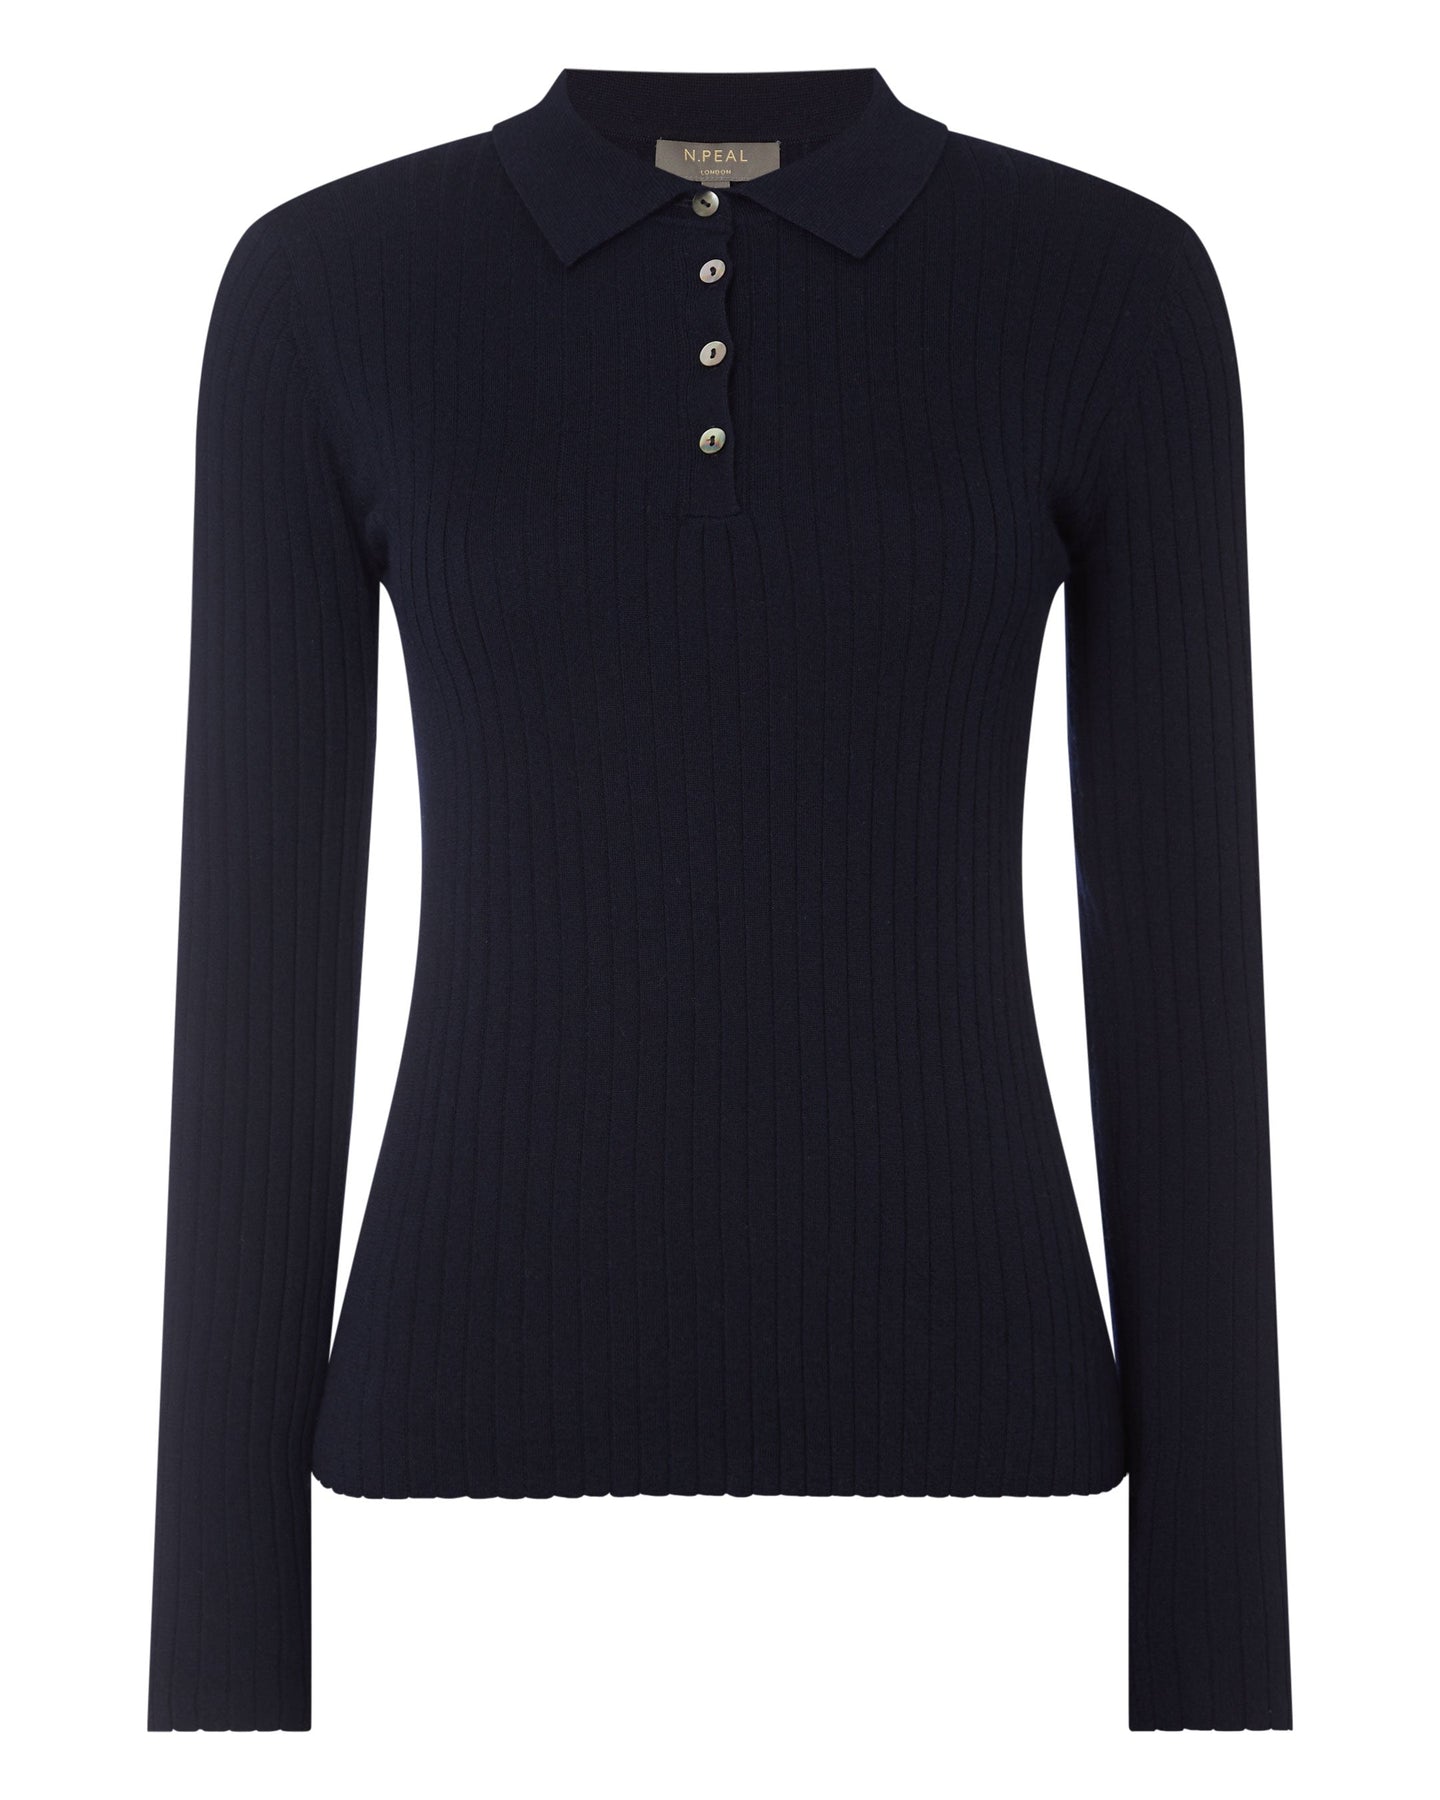 N.Peal Women's Collared Rib Cashmere Jumper Navy Blue